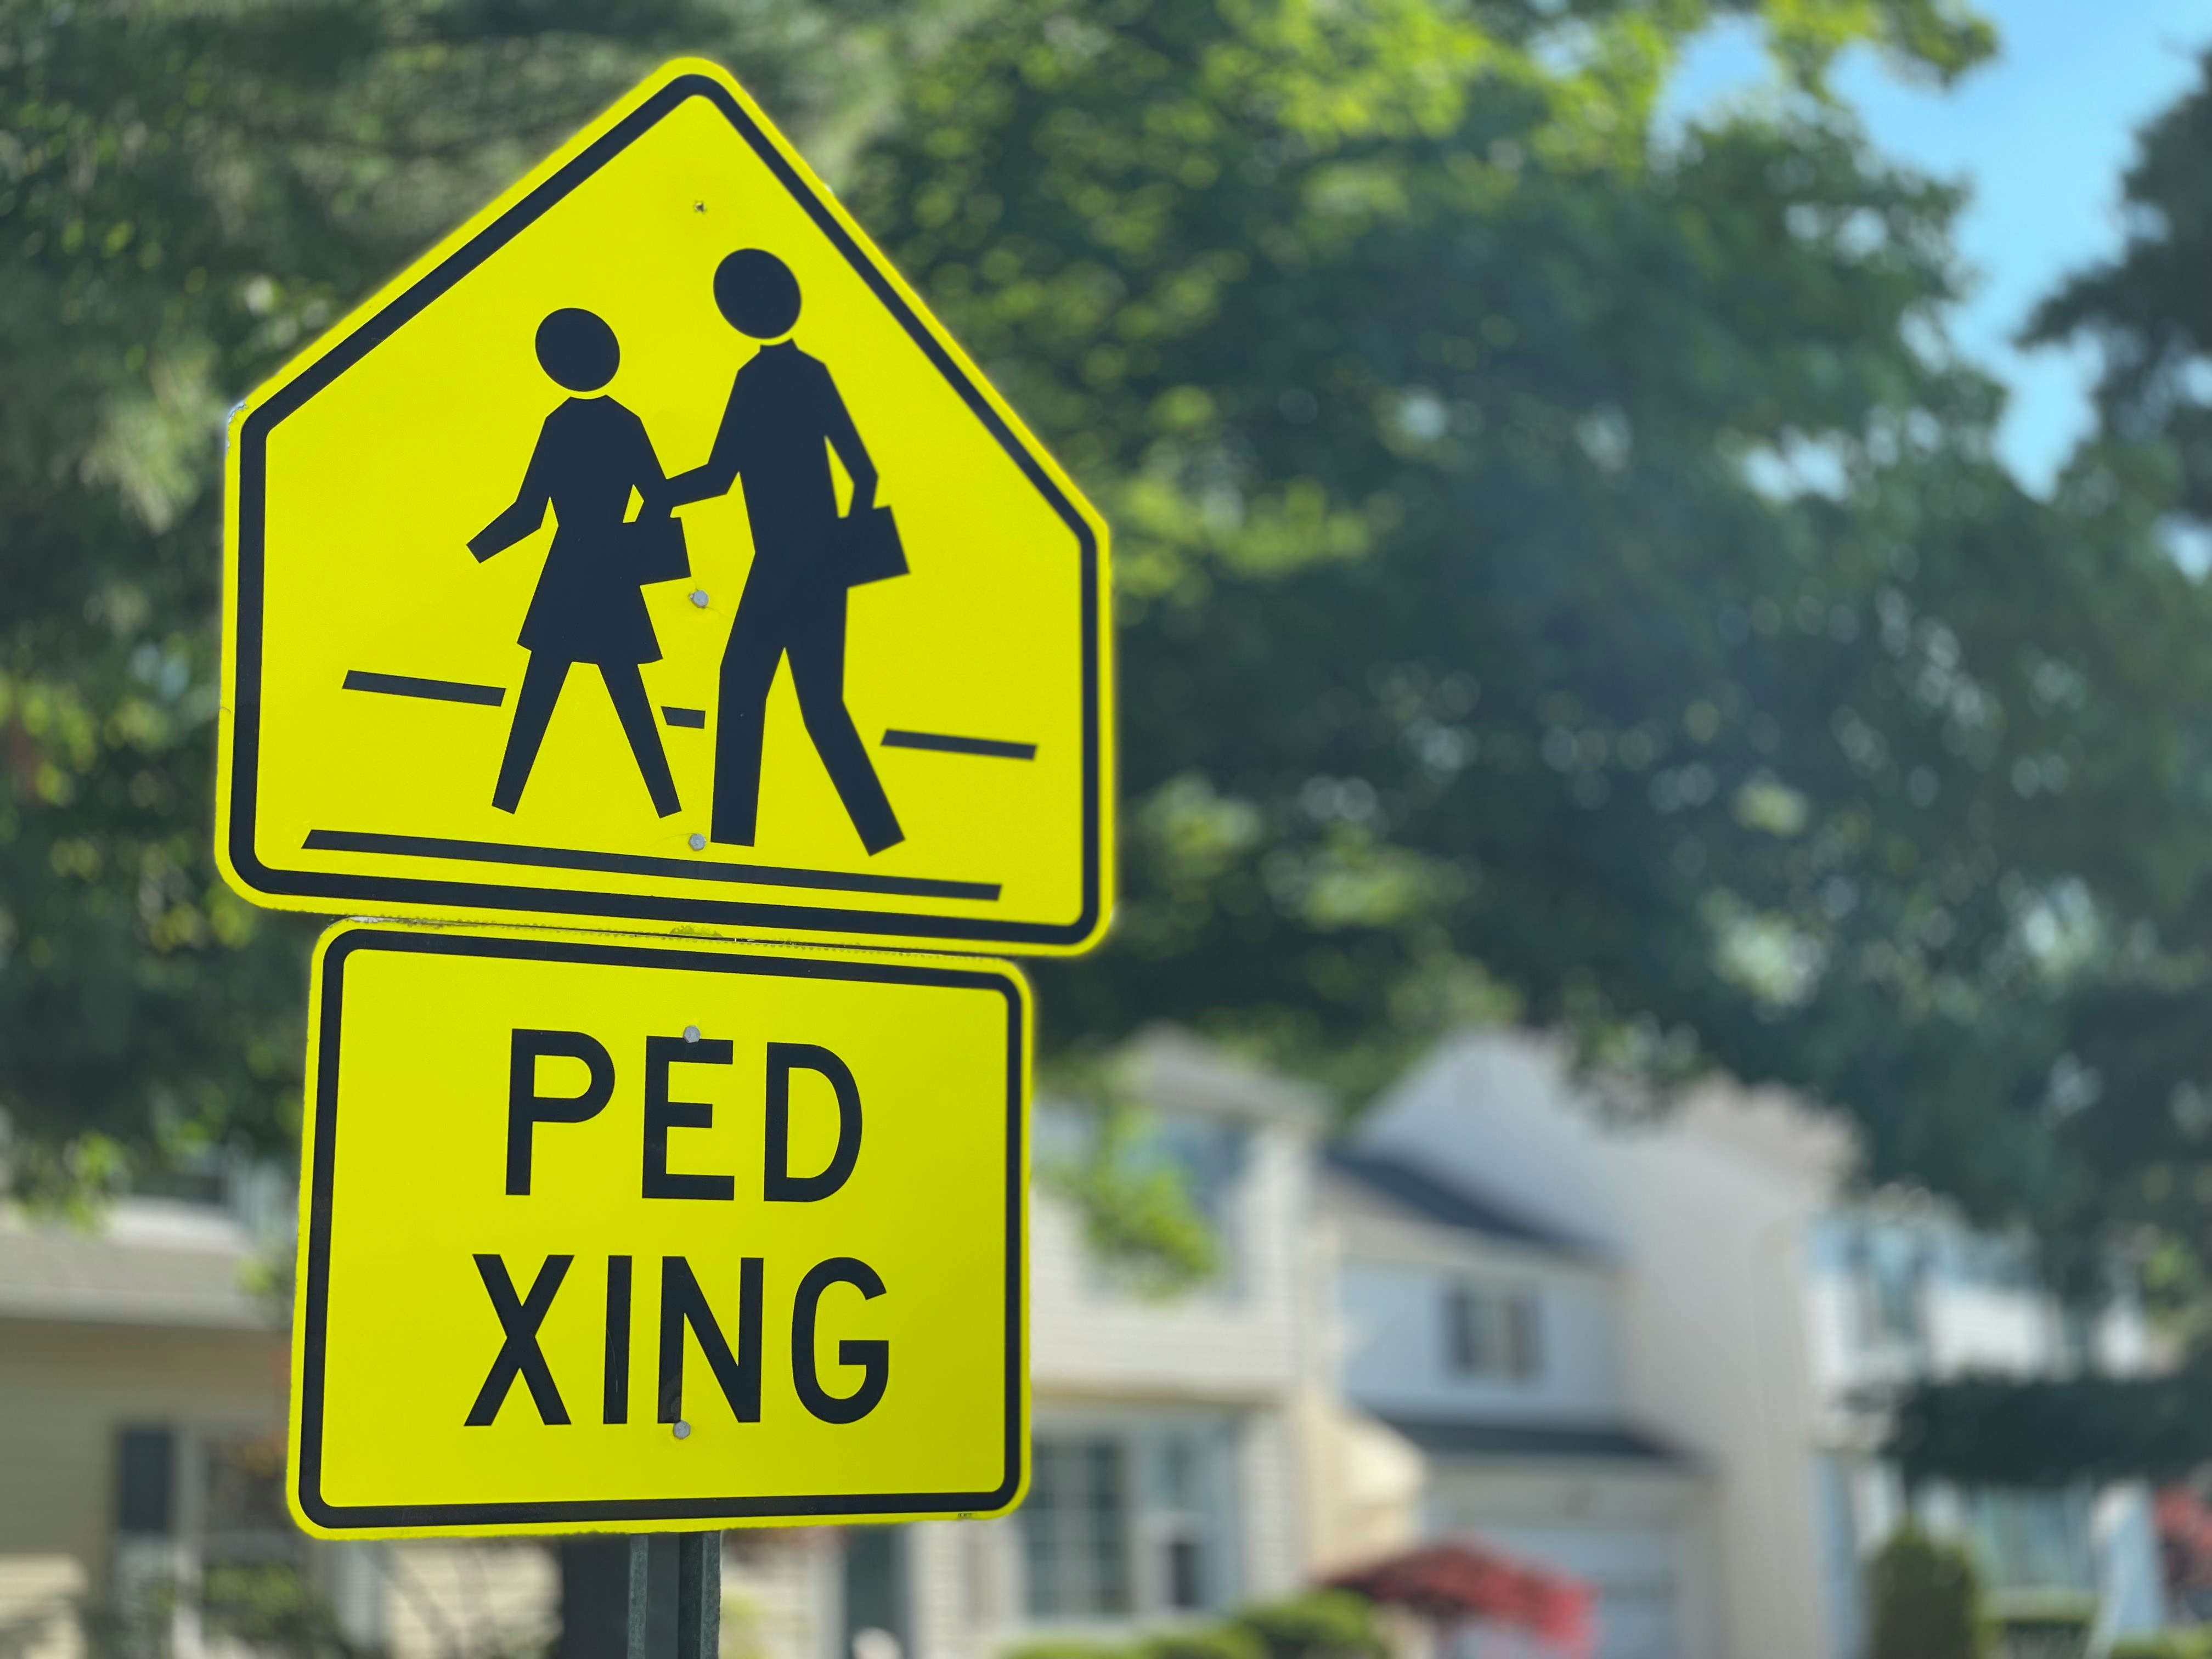 Pedestrian crossing sign detail image